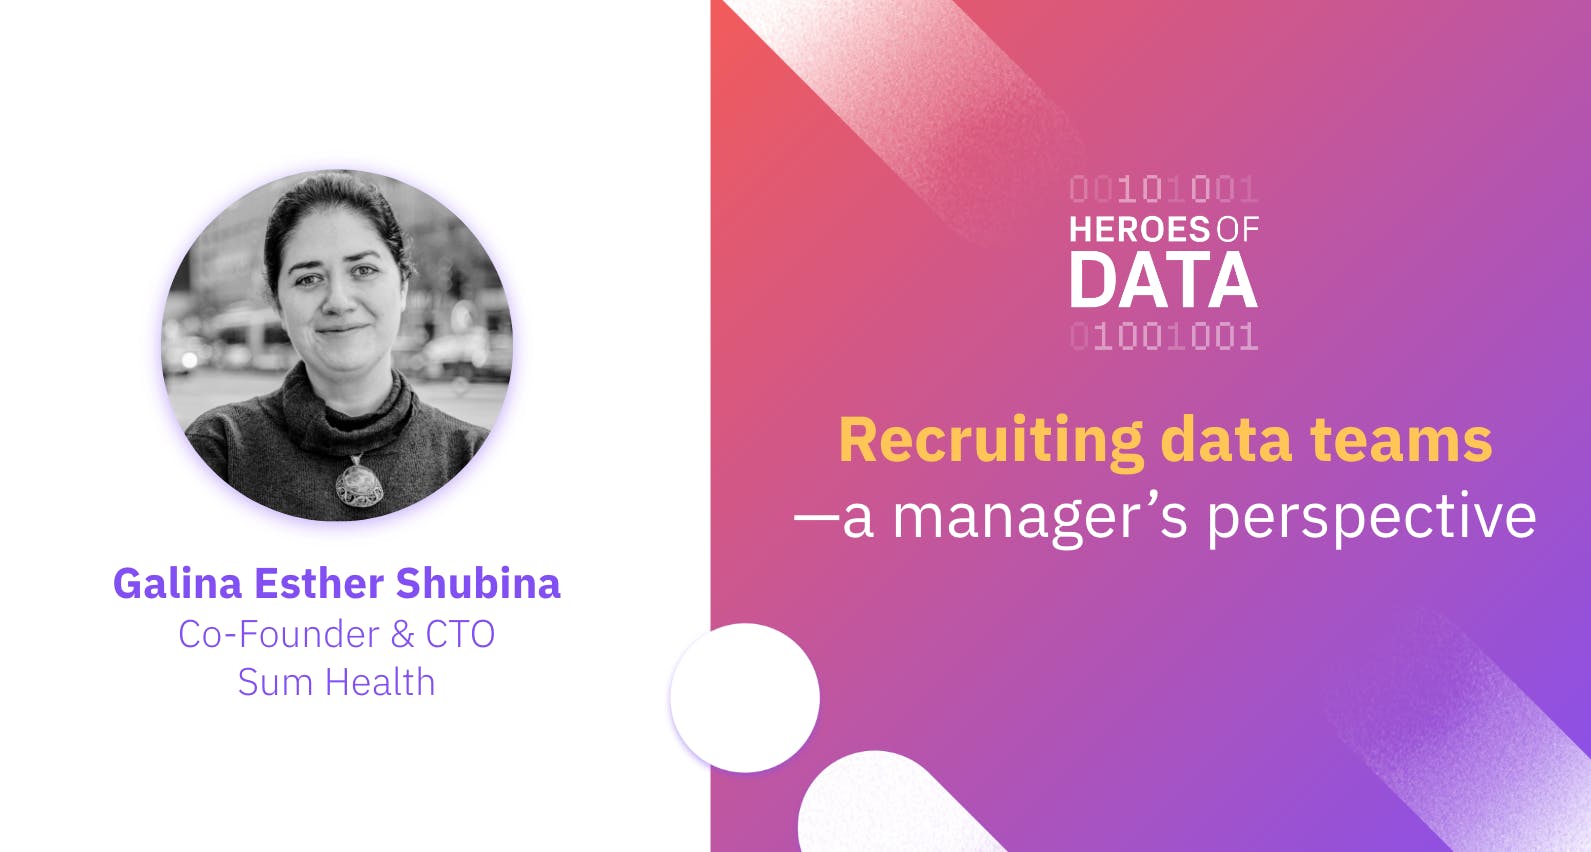 Galina Esther Shubina, Co-Founder and CTO at Sum Health: Recruiting data teams - a manager's perspective.